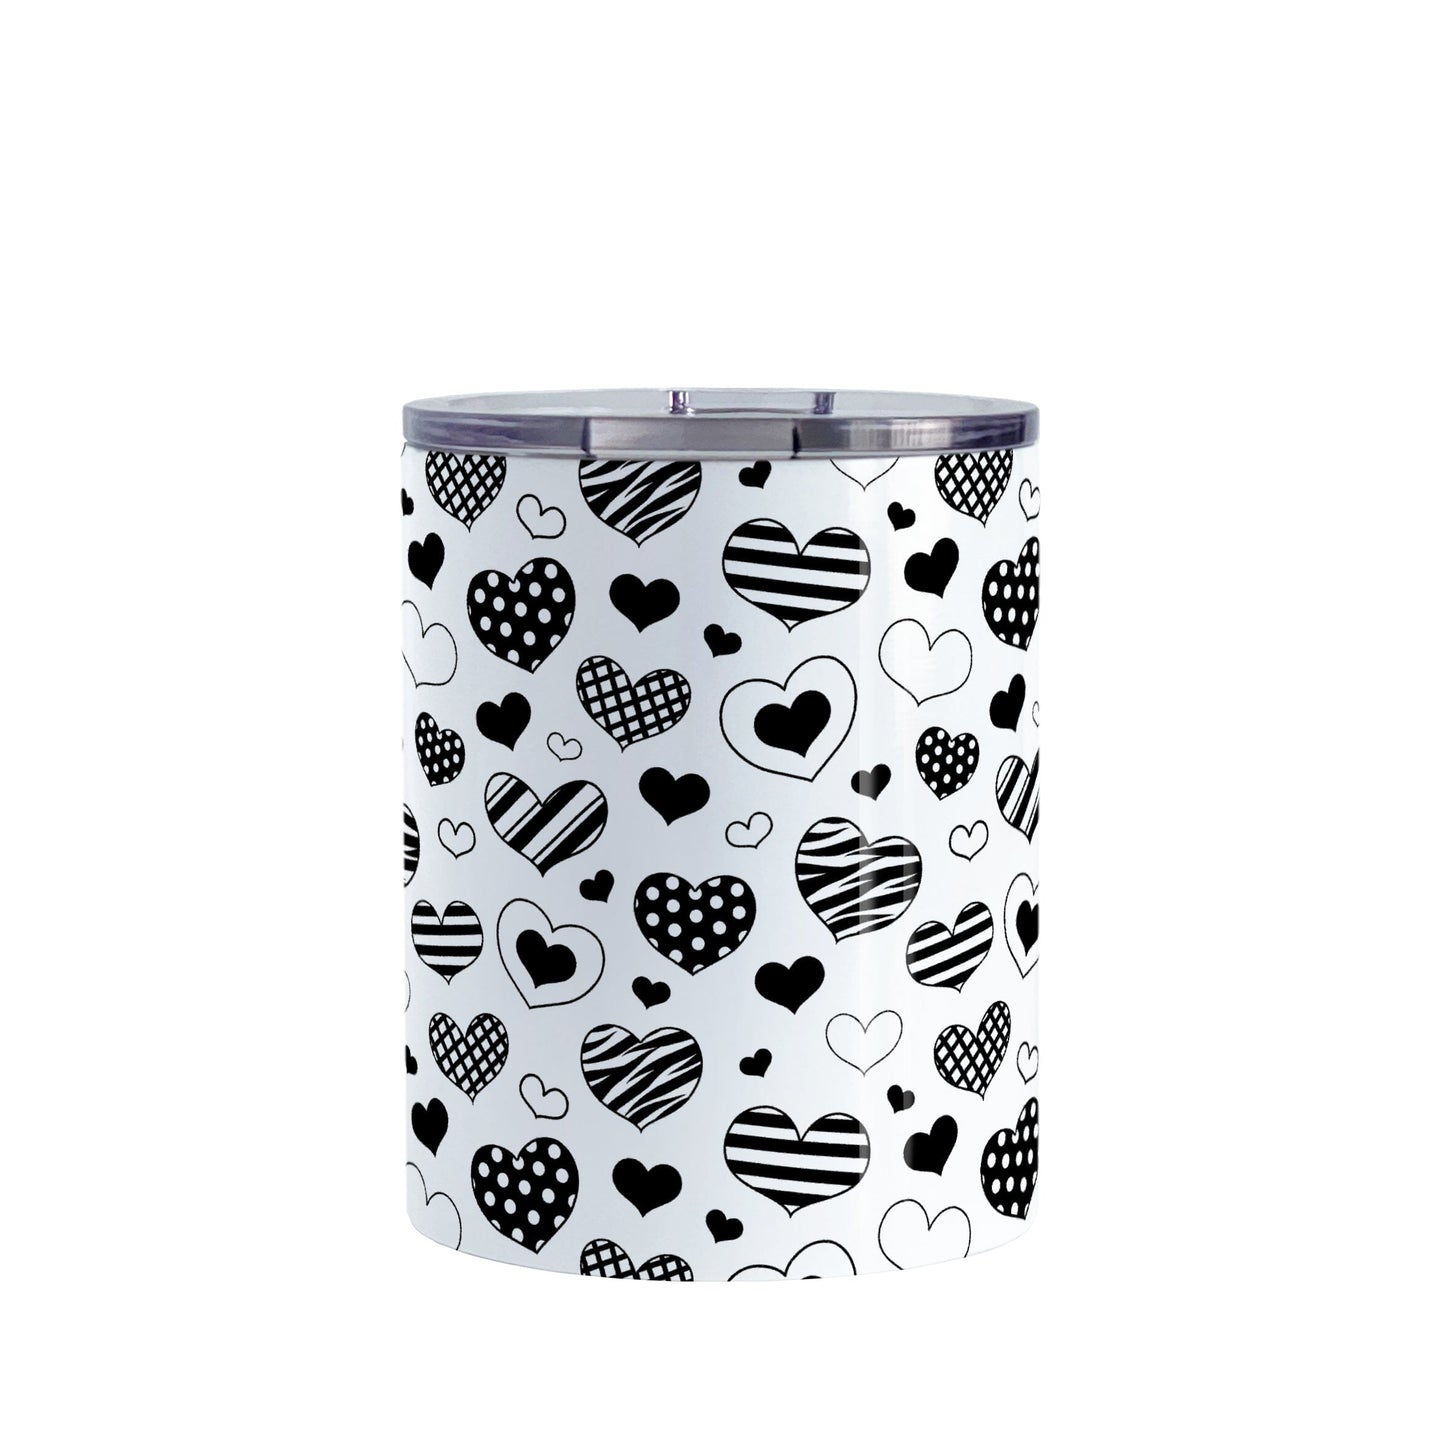 Black Heart Doodles Tumbler Cup (10oz) at Amy's Coffee Mugs. A stainless steel tumbler cup designed with hand-drawn black heart doodles in a pattern that wraps around the cup. This cute heart pattern is perfect for Valentine's Day or for anyone who loves hearts and young-at-heart drawings. 